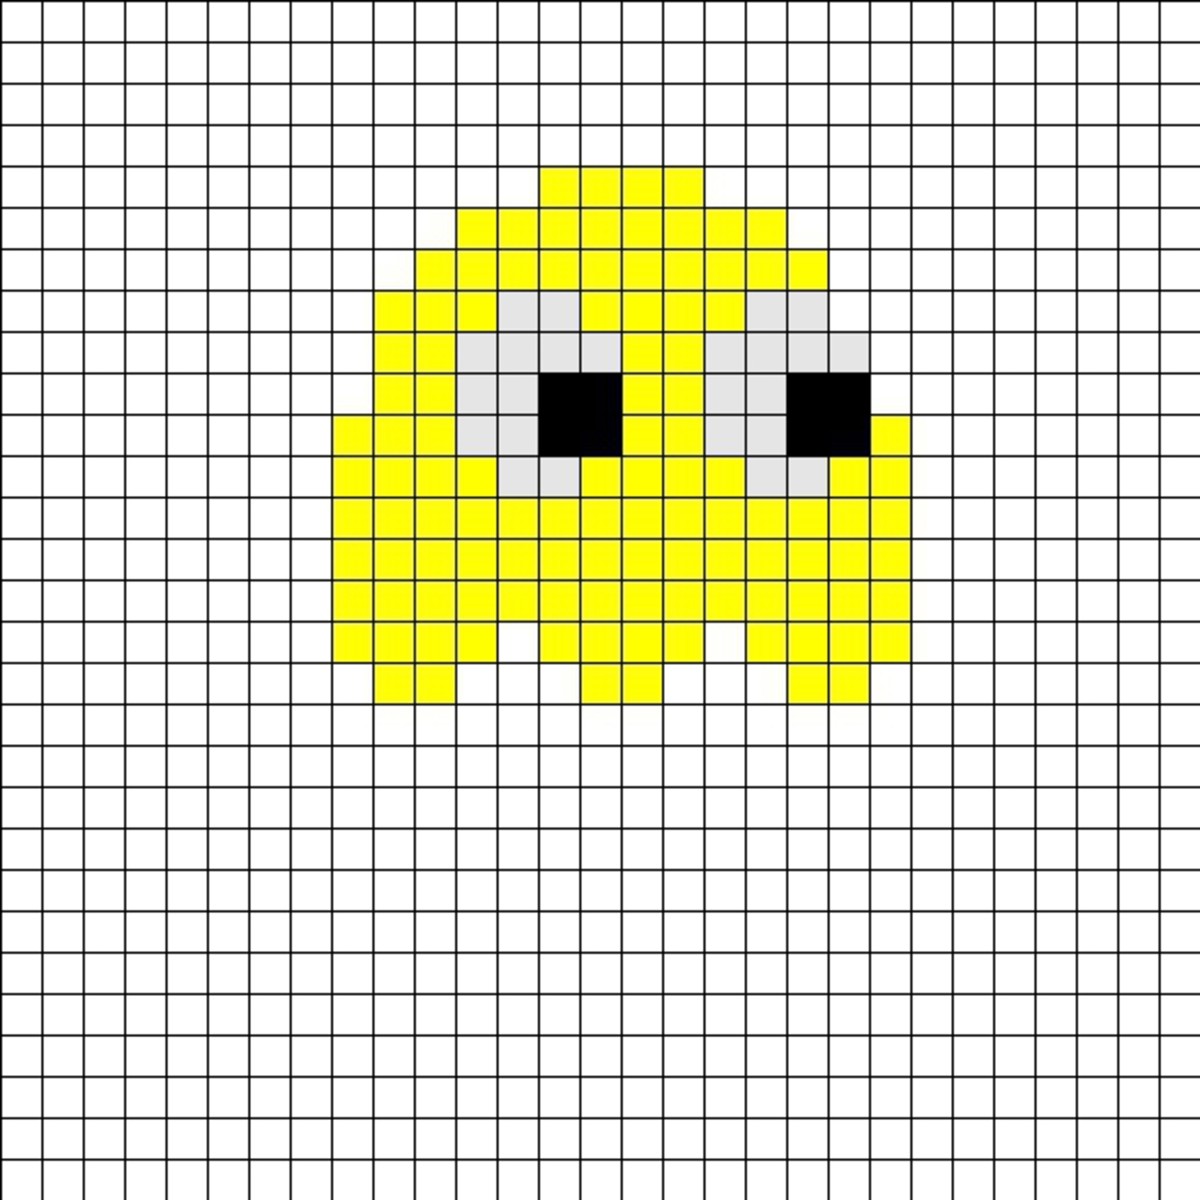 get-your-geek-on-with-a-hama-beads-tutorial